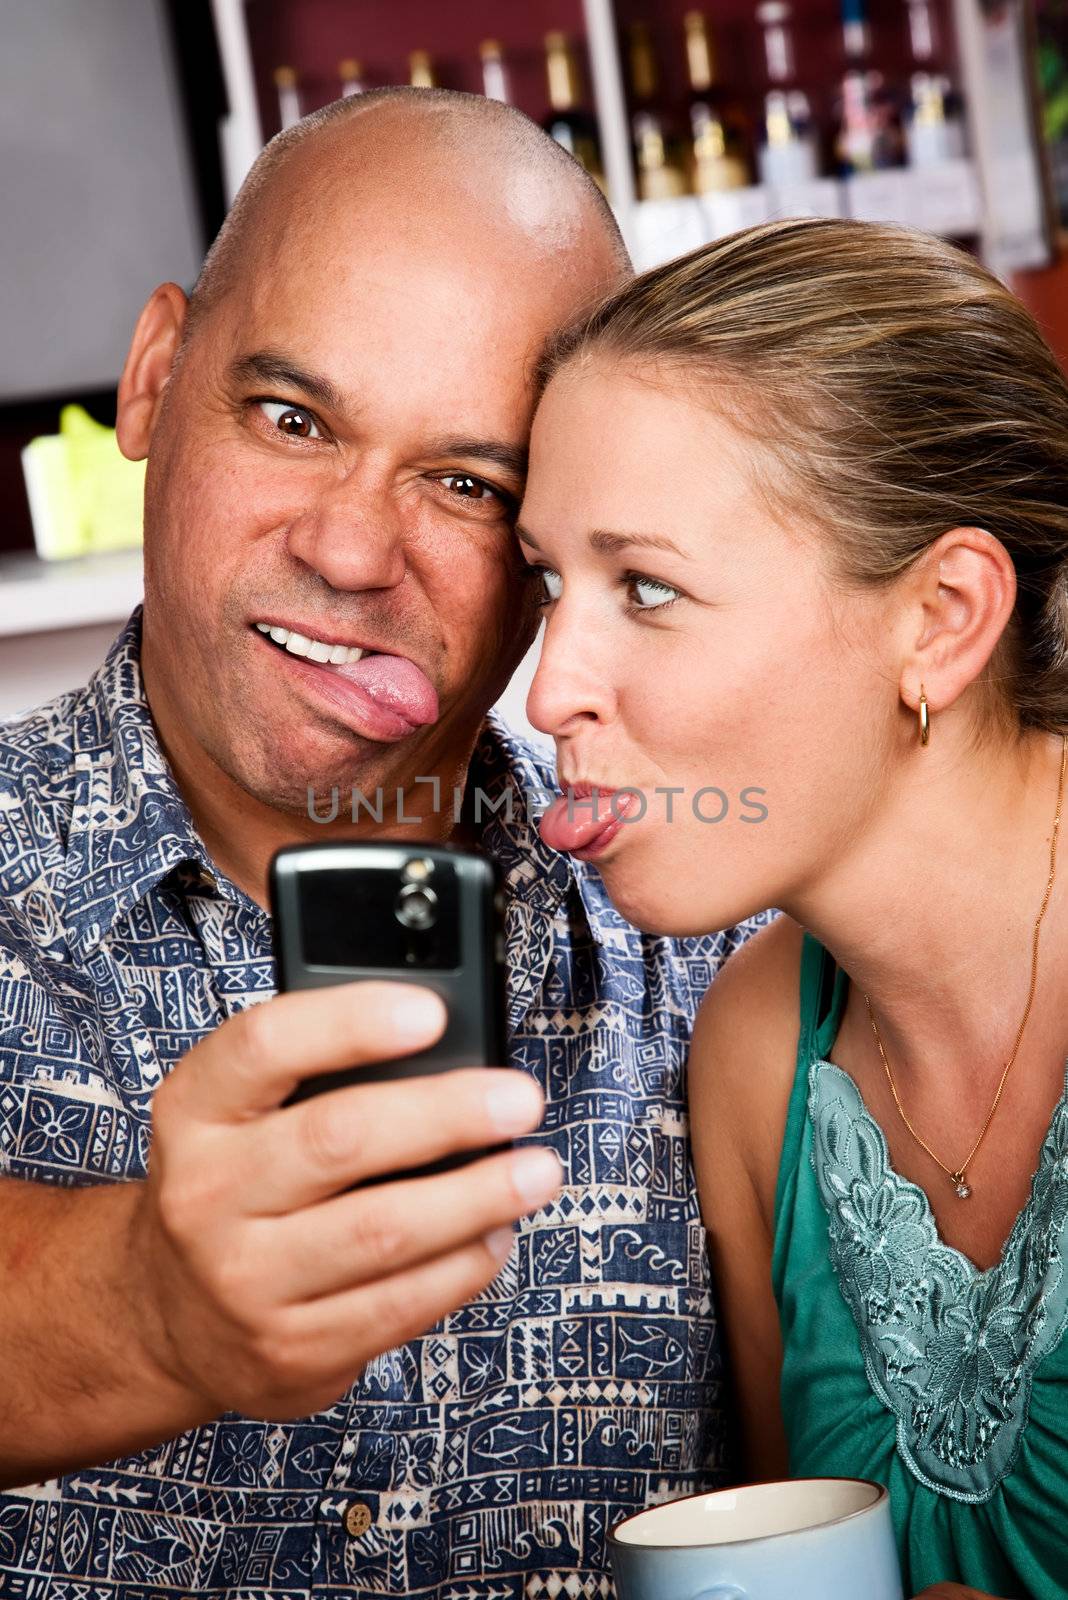 Couple in Coffee House Taking Self-Portrait with Cell Phone by Creatista